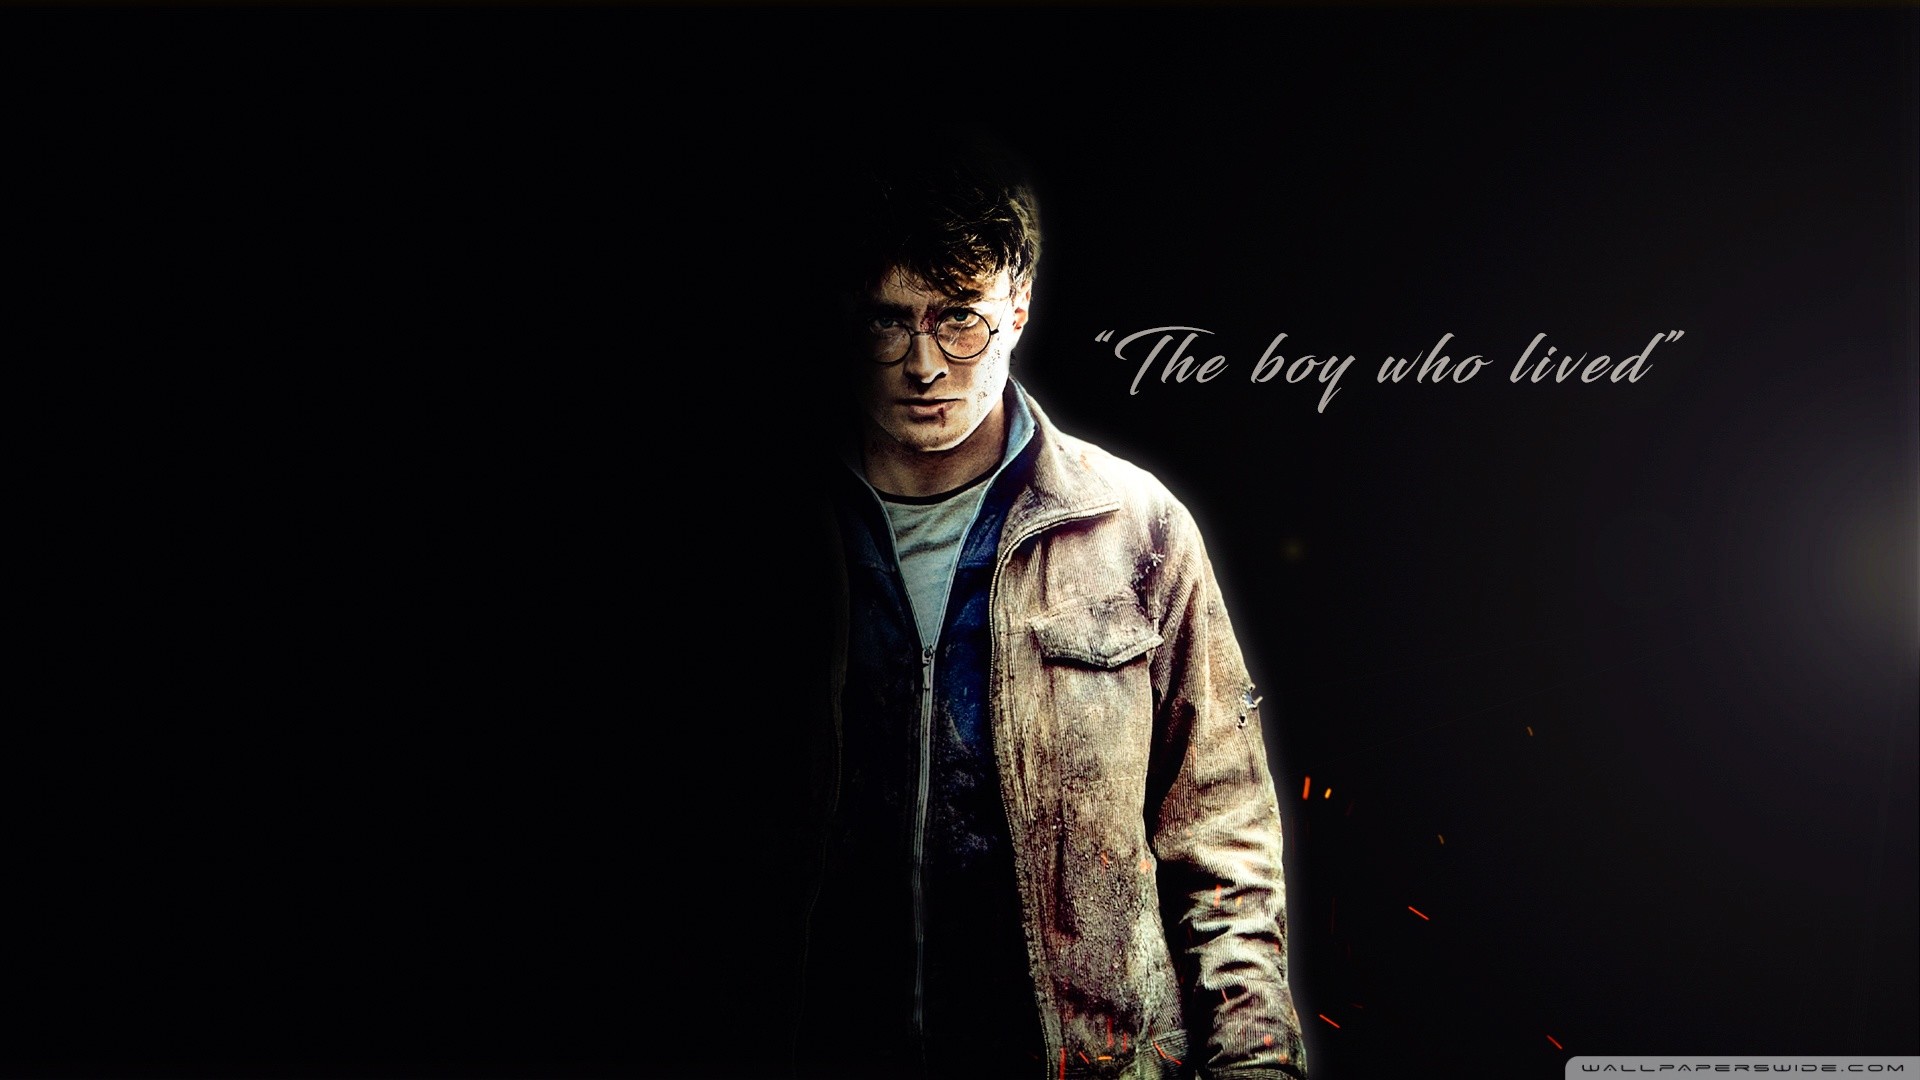 Harry Potter – The boy who lived HD Wide Wallpaper for Widescreen